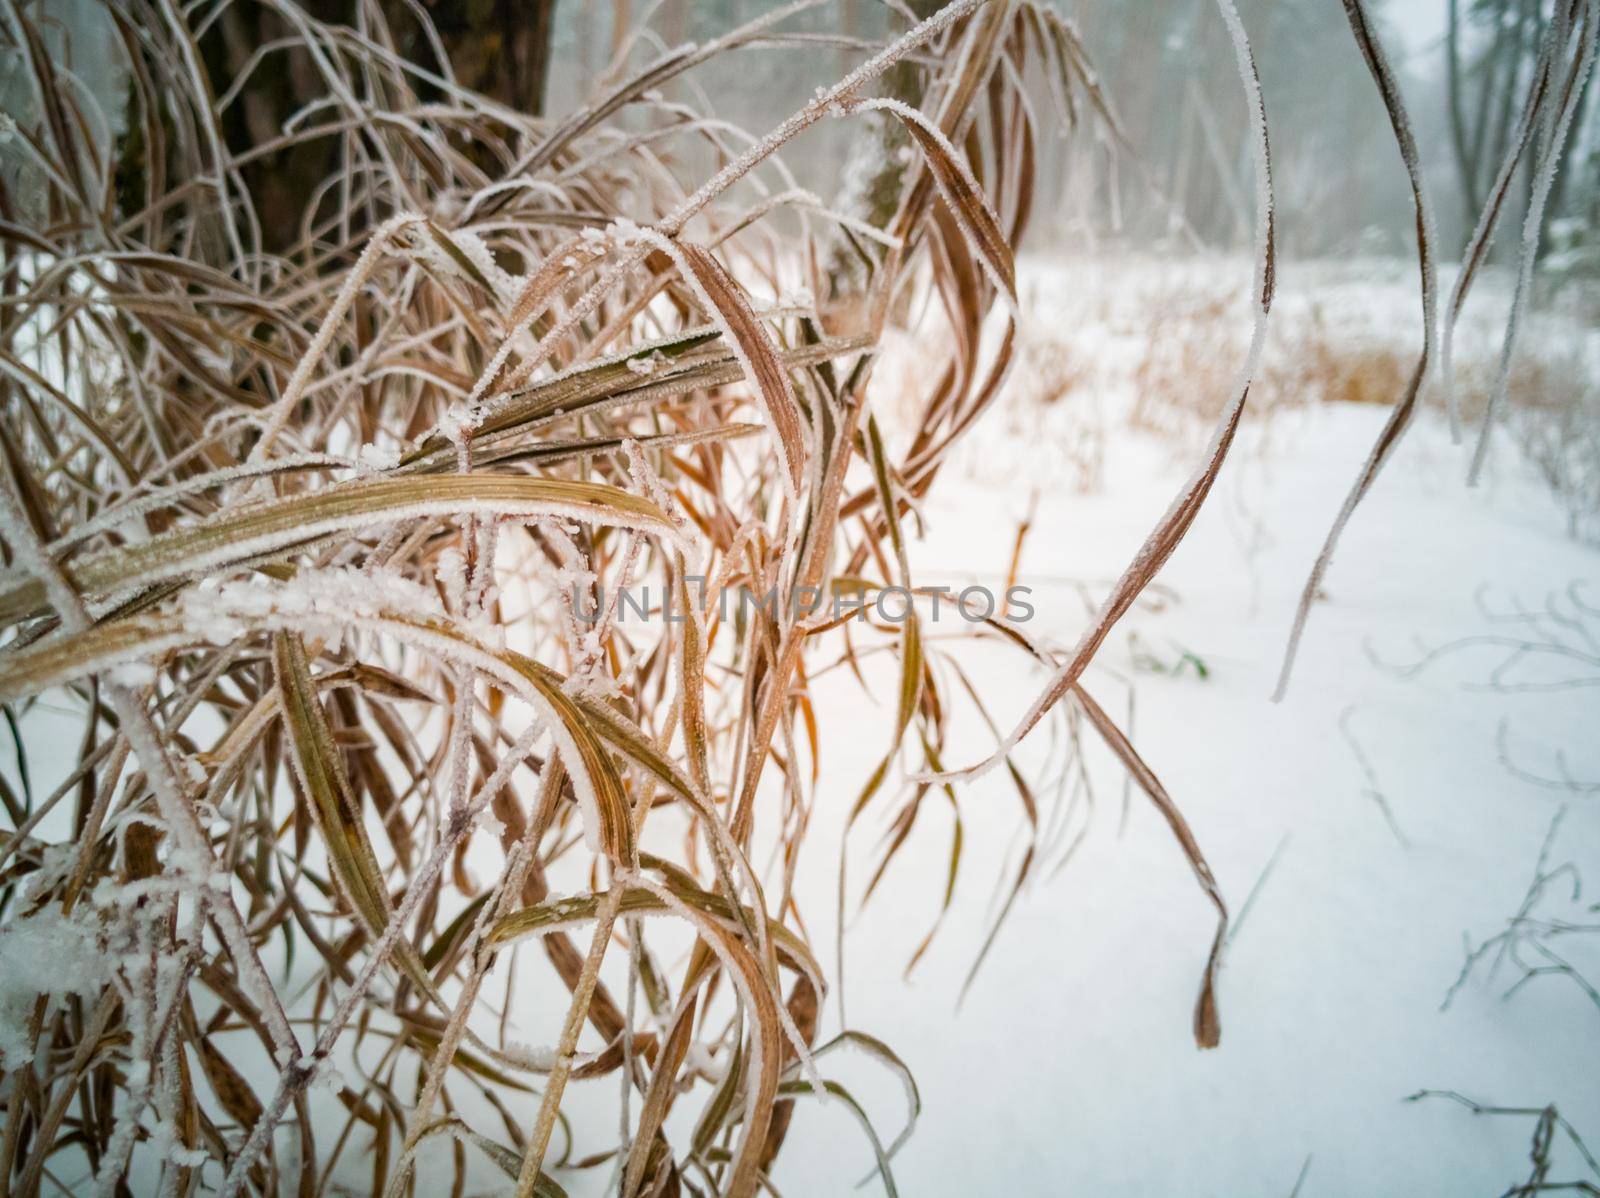 dry yellow grass under the snow. soft focus close up by Mariaprovector